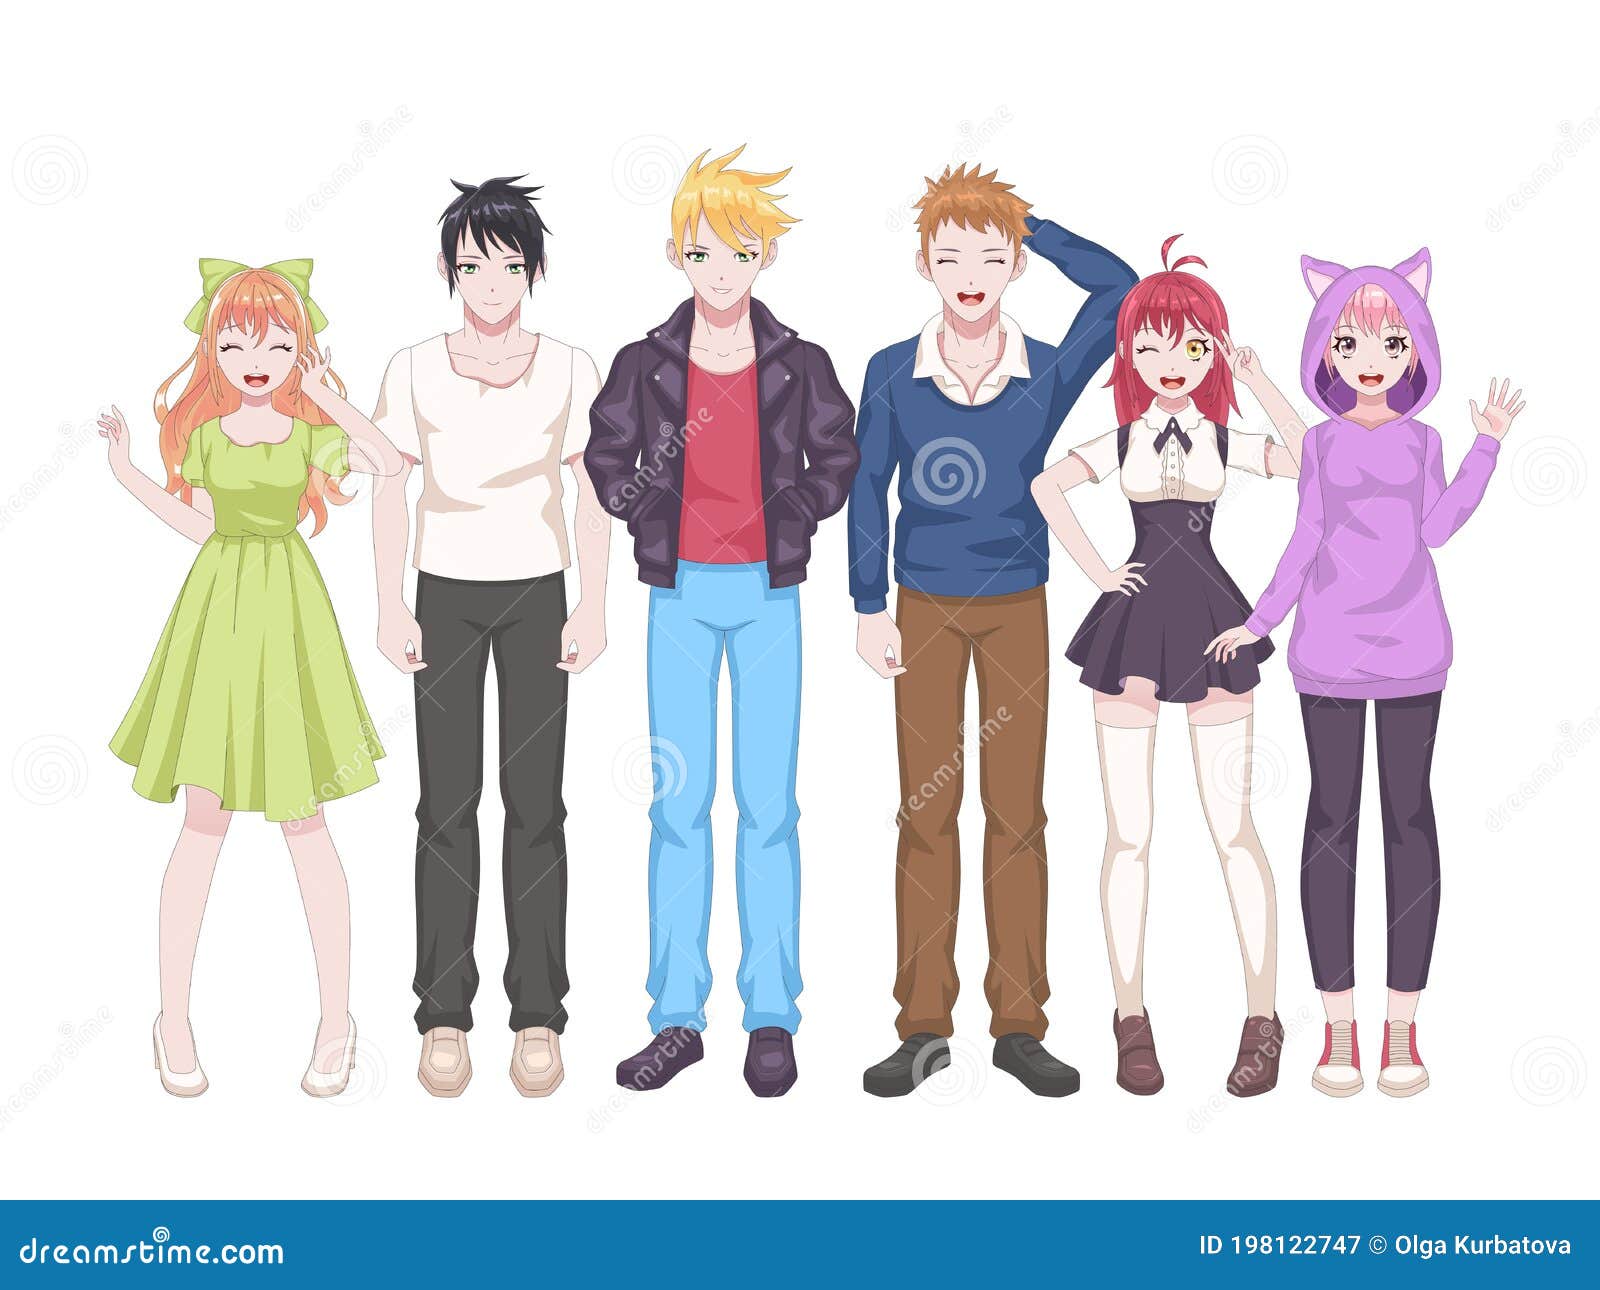 group anime characters. manga girls and boys, kawaii asian teens in casual japanese or korean cosplay clothes. smiling